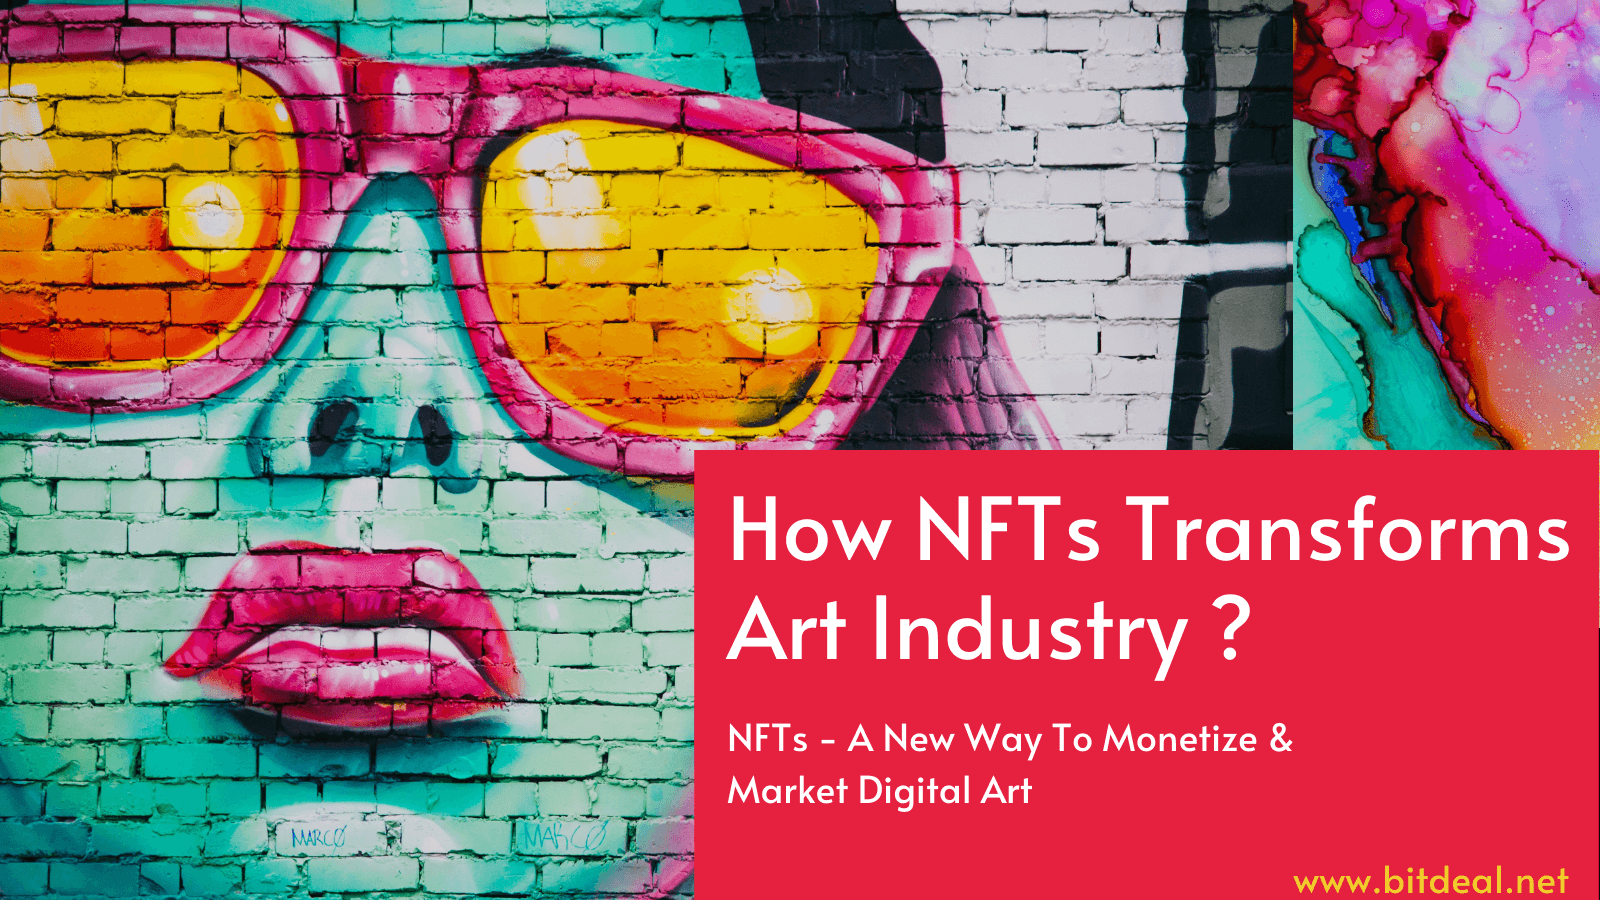 How Non-Fungible Tokens (NFTs) Are Transforming The Art Industry?